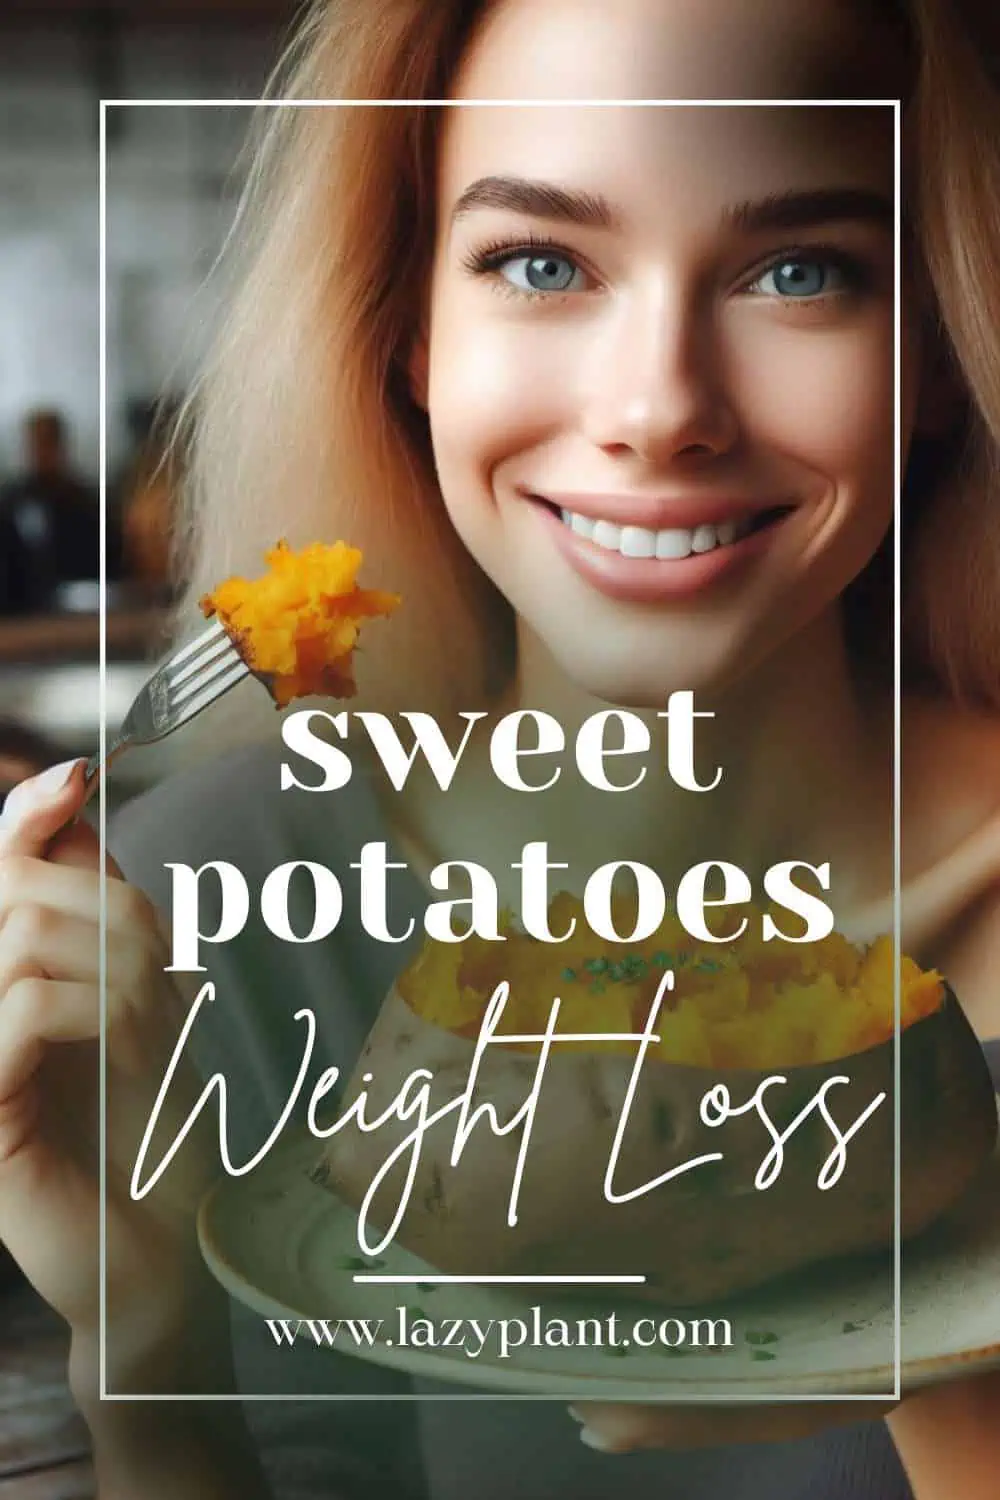 How to eat sweet potatoes for Weight Loss?